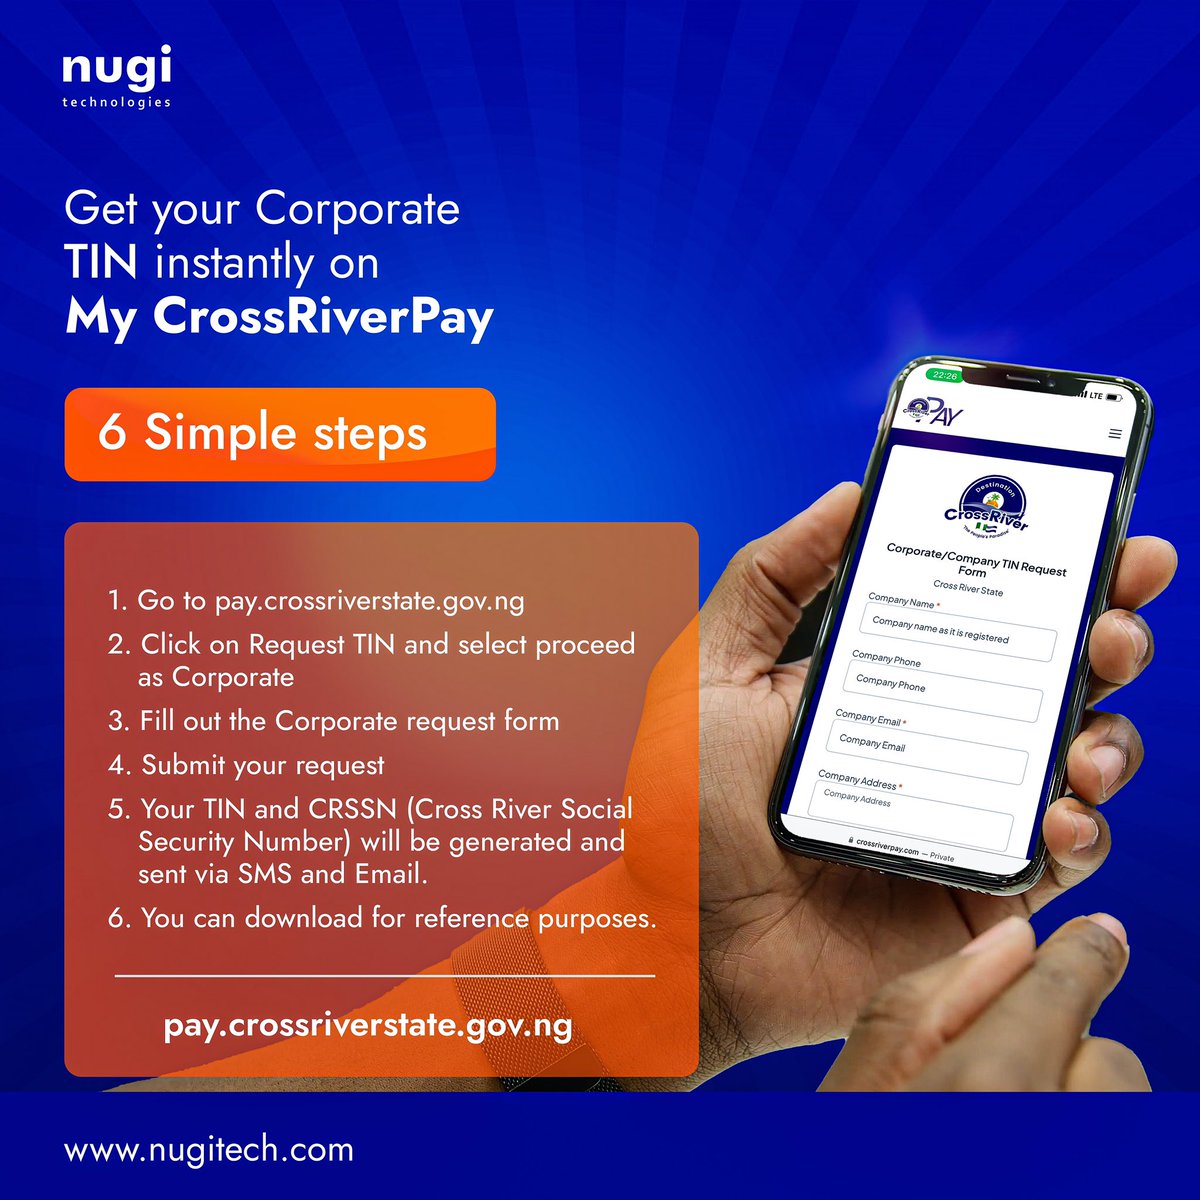 Are you a business owner in Calabar looking to generate your TIN without visiting a physical office? Look no further. With My CrossRiverPay, you can get your Corporate TIN instantly online from any location. Simply visit pay.crossriverstate.gov.ng and follow the easy steps.